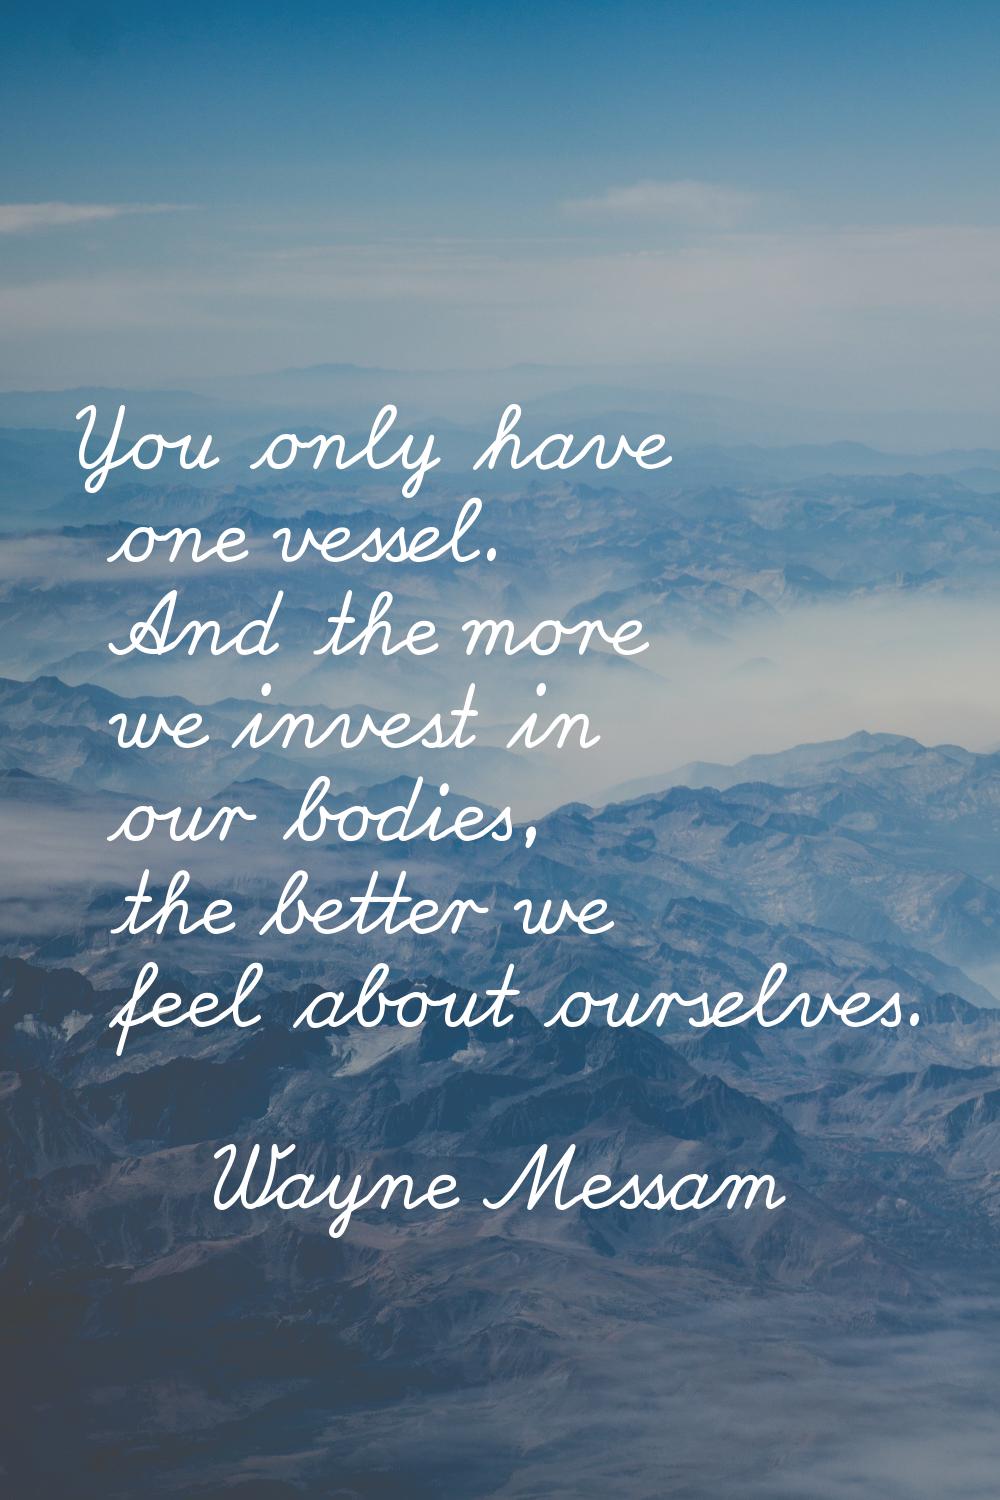 You only have one vessel. And the more we invest in our bodies, the better we feel about ourselves.